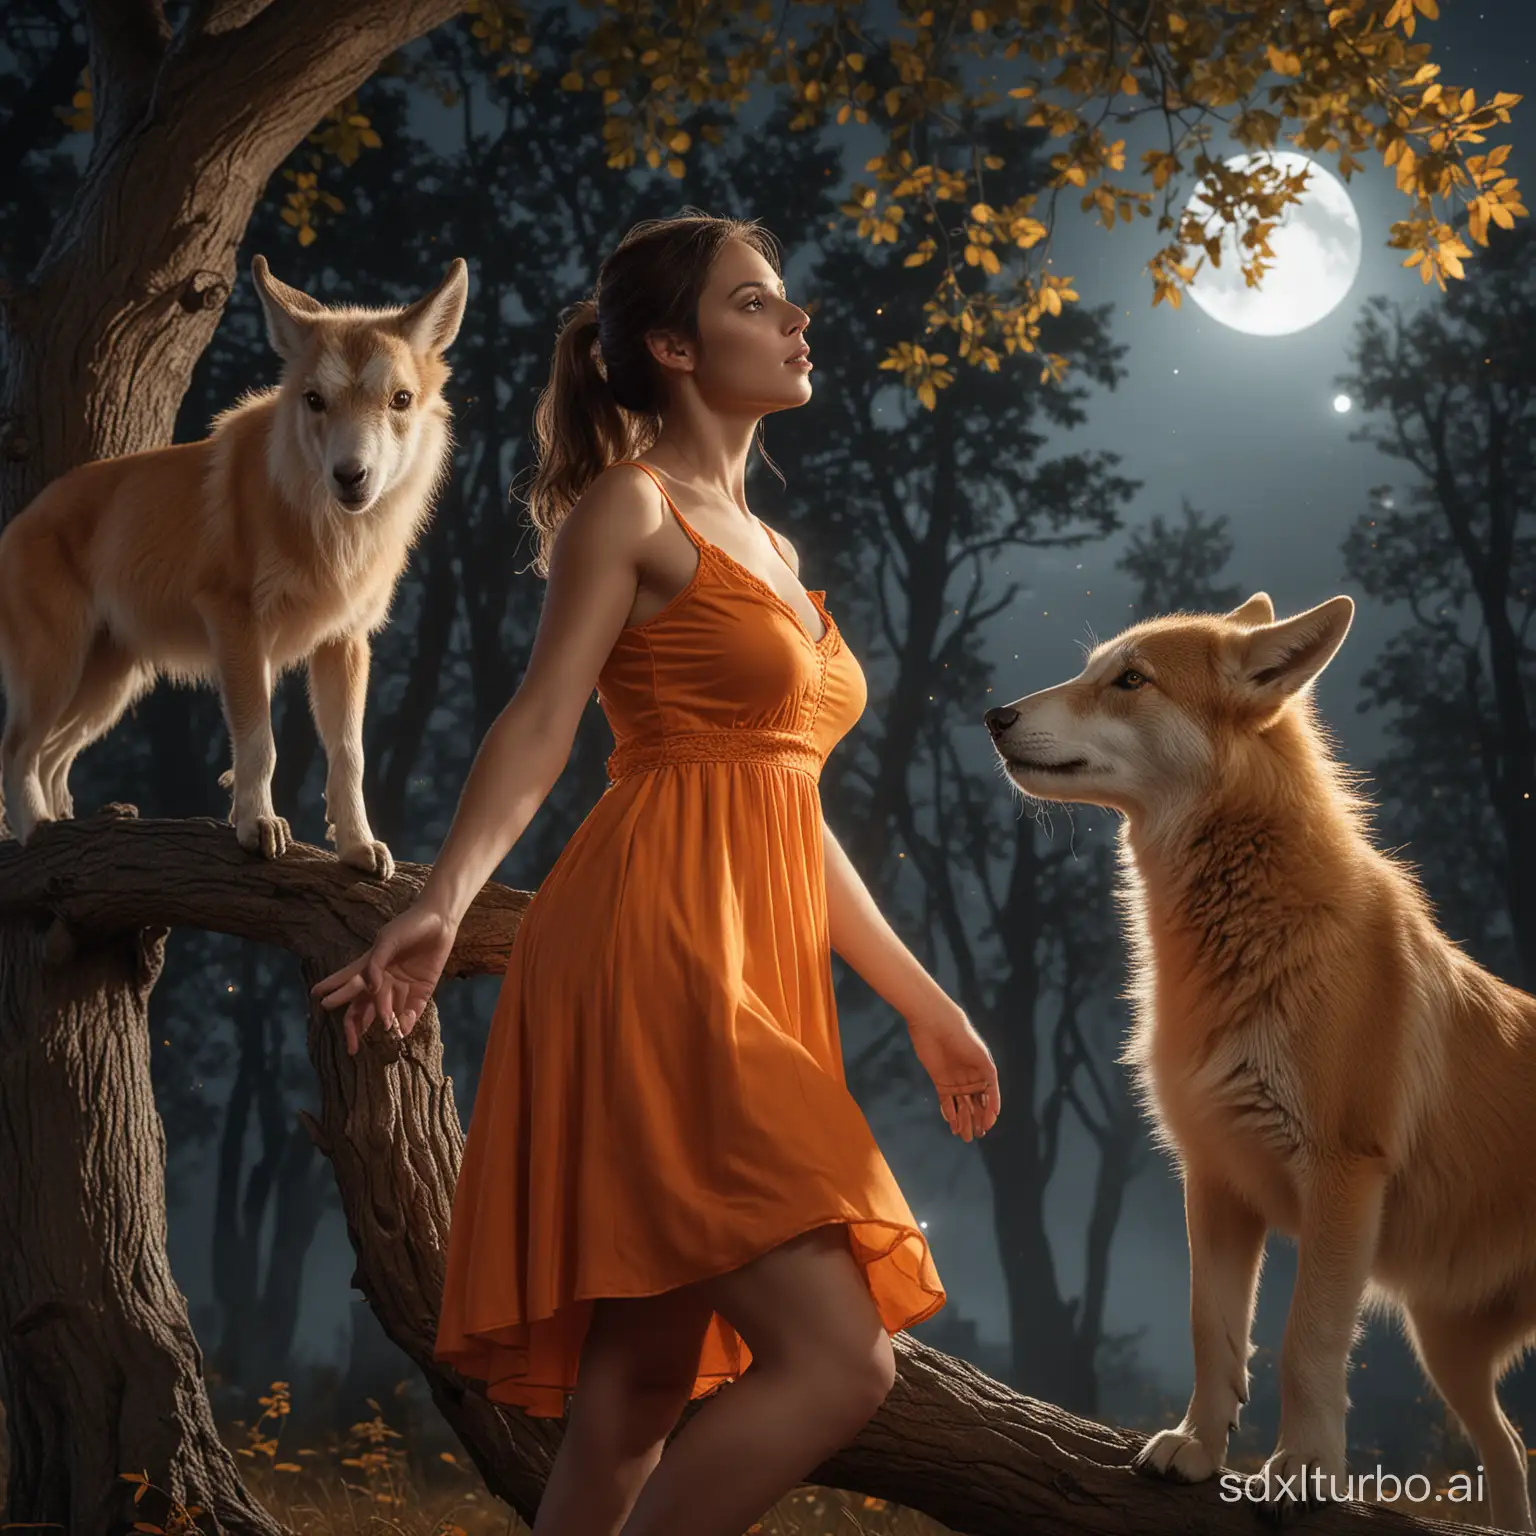 Hyper-Realistic-Young-Woman-in-Orange-Dress-Leaning-on-Tree-Surrounded-by-Spirit-Wolves-Under-Moonlit-Sky